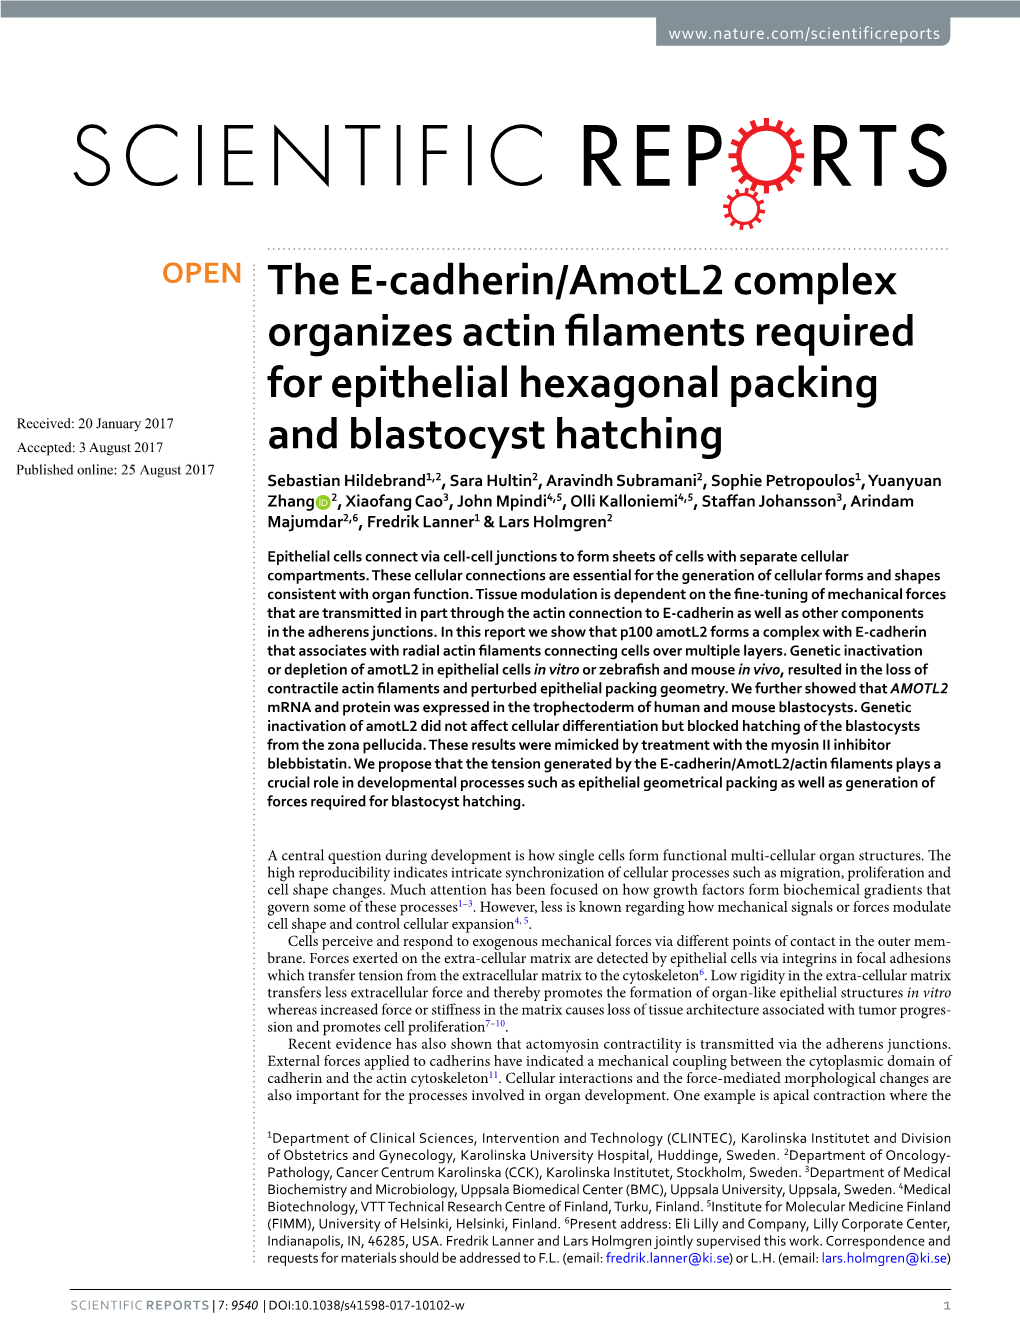 The E-Cadherin/Amotl2 Complex Organizes Actin Filaments Required